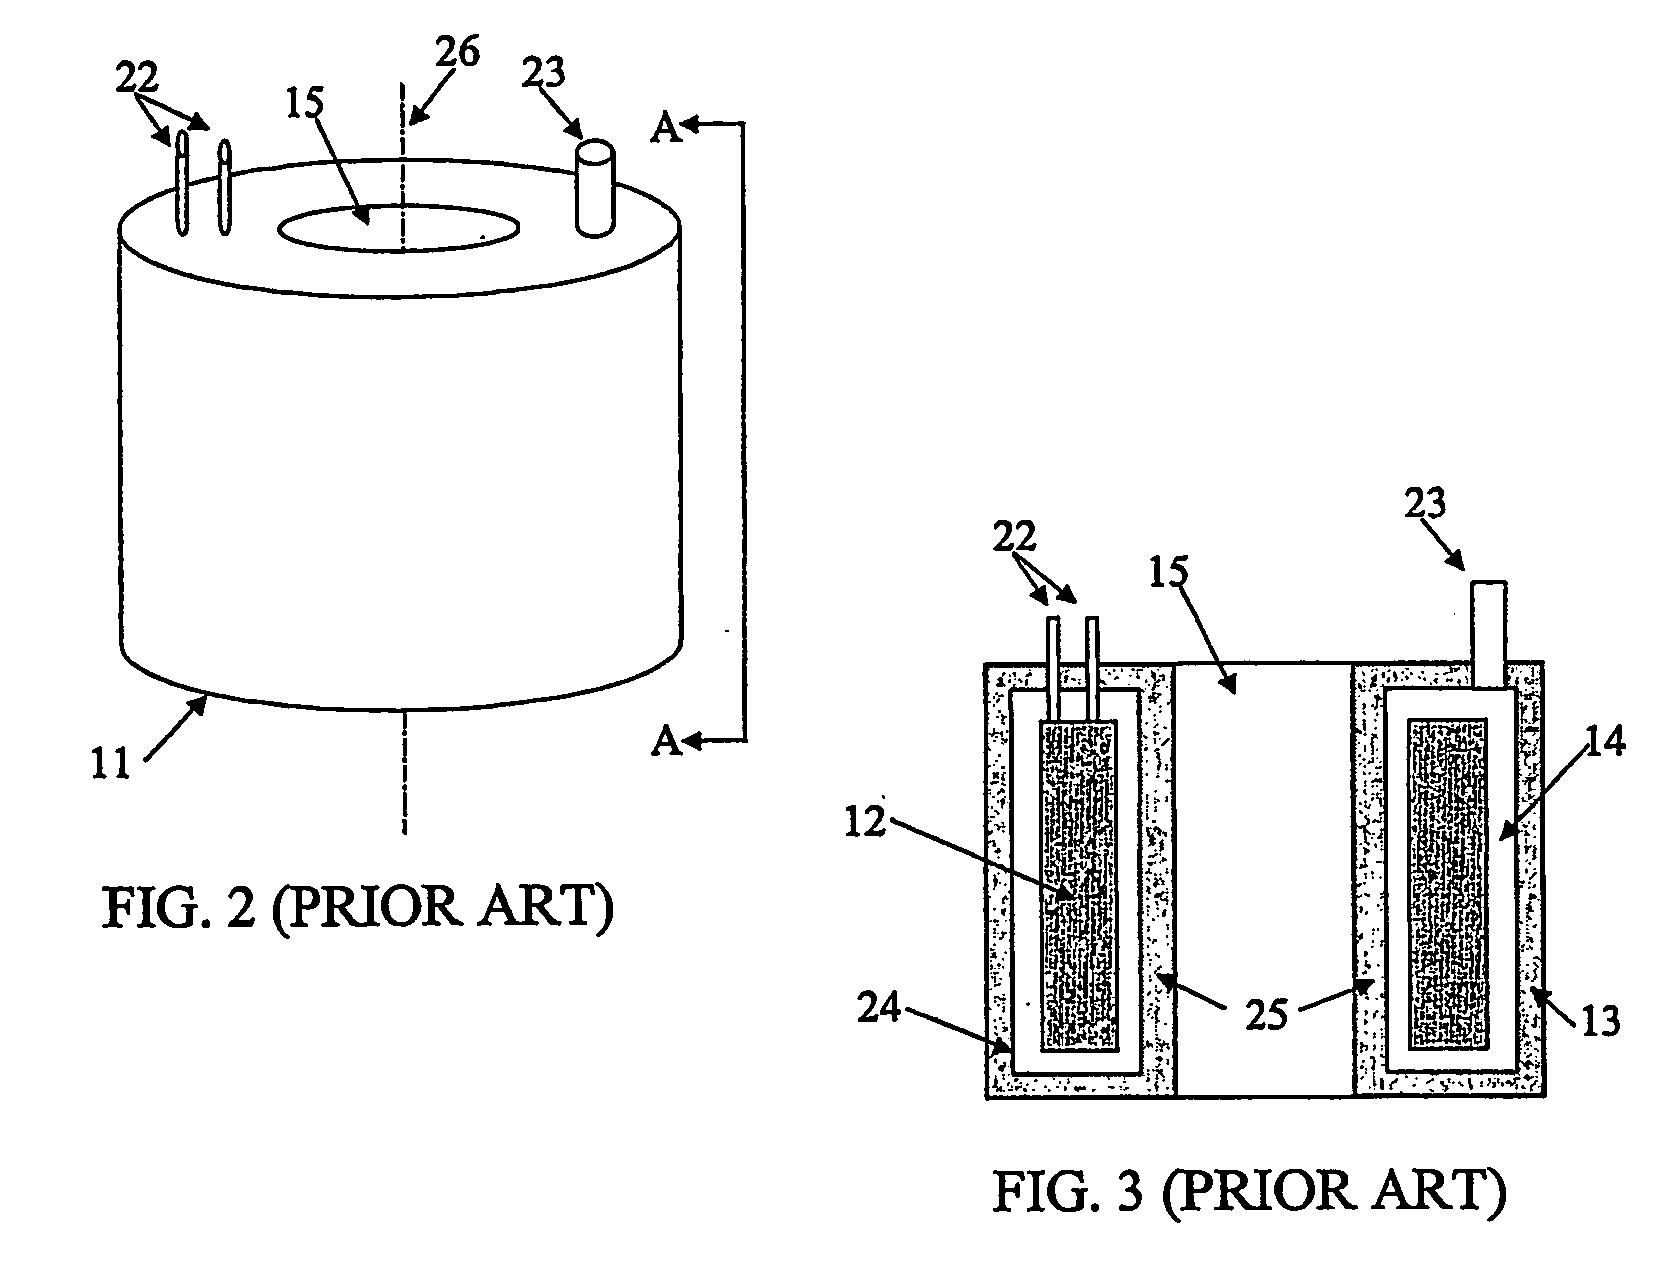 Apparatus and method for ion cyclotron resonance mass spectrometry